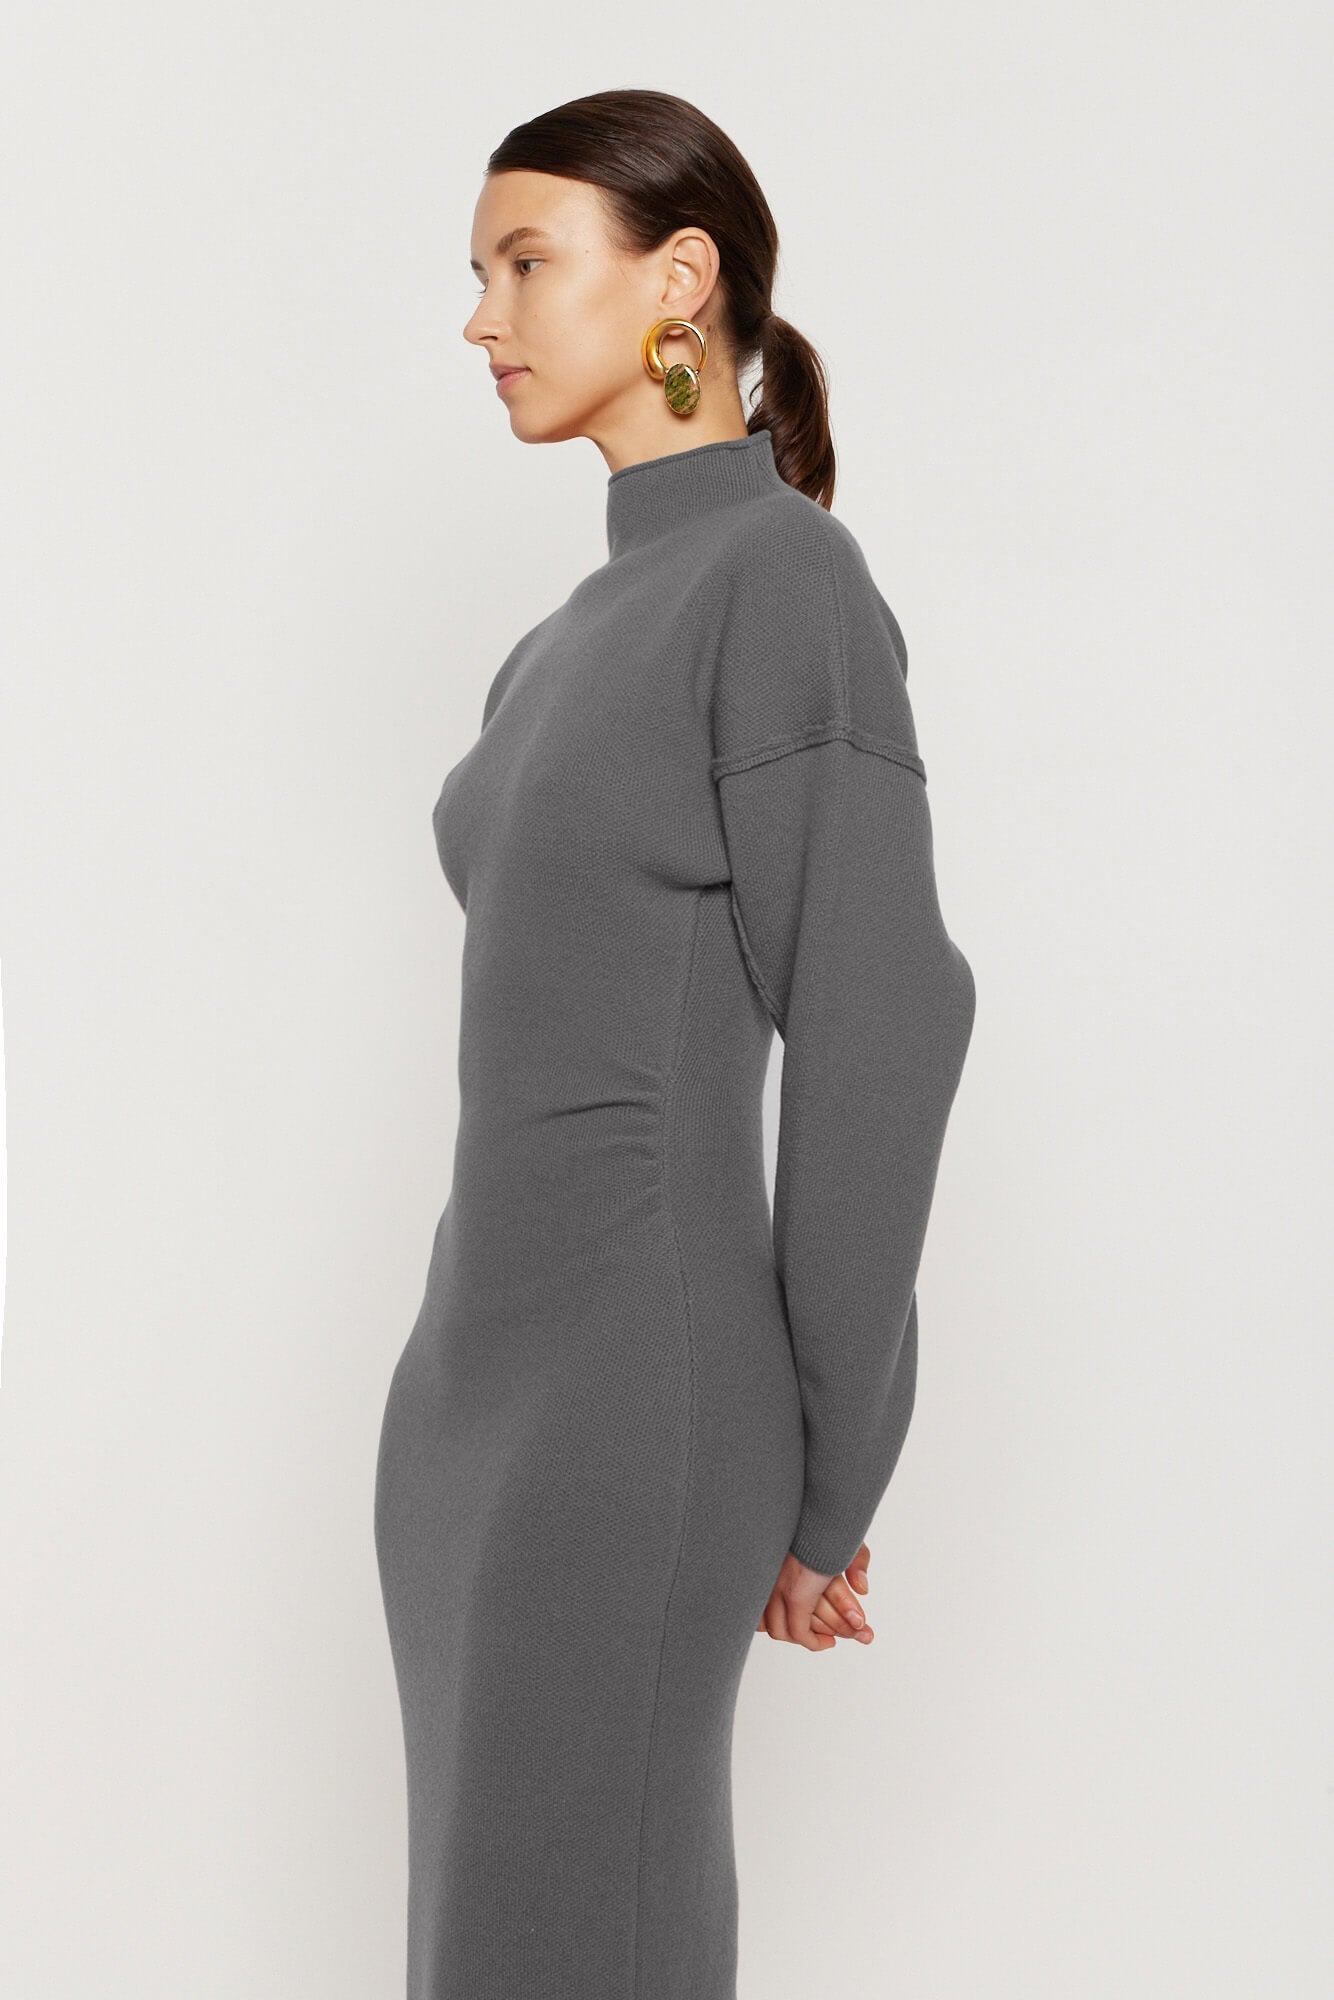 Heather Grey Wool and Cashmere Midi Dress with High Neck